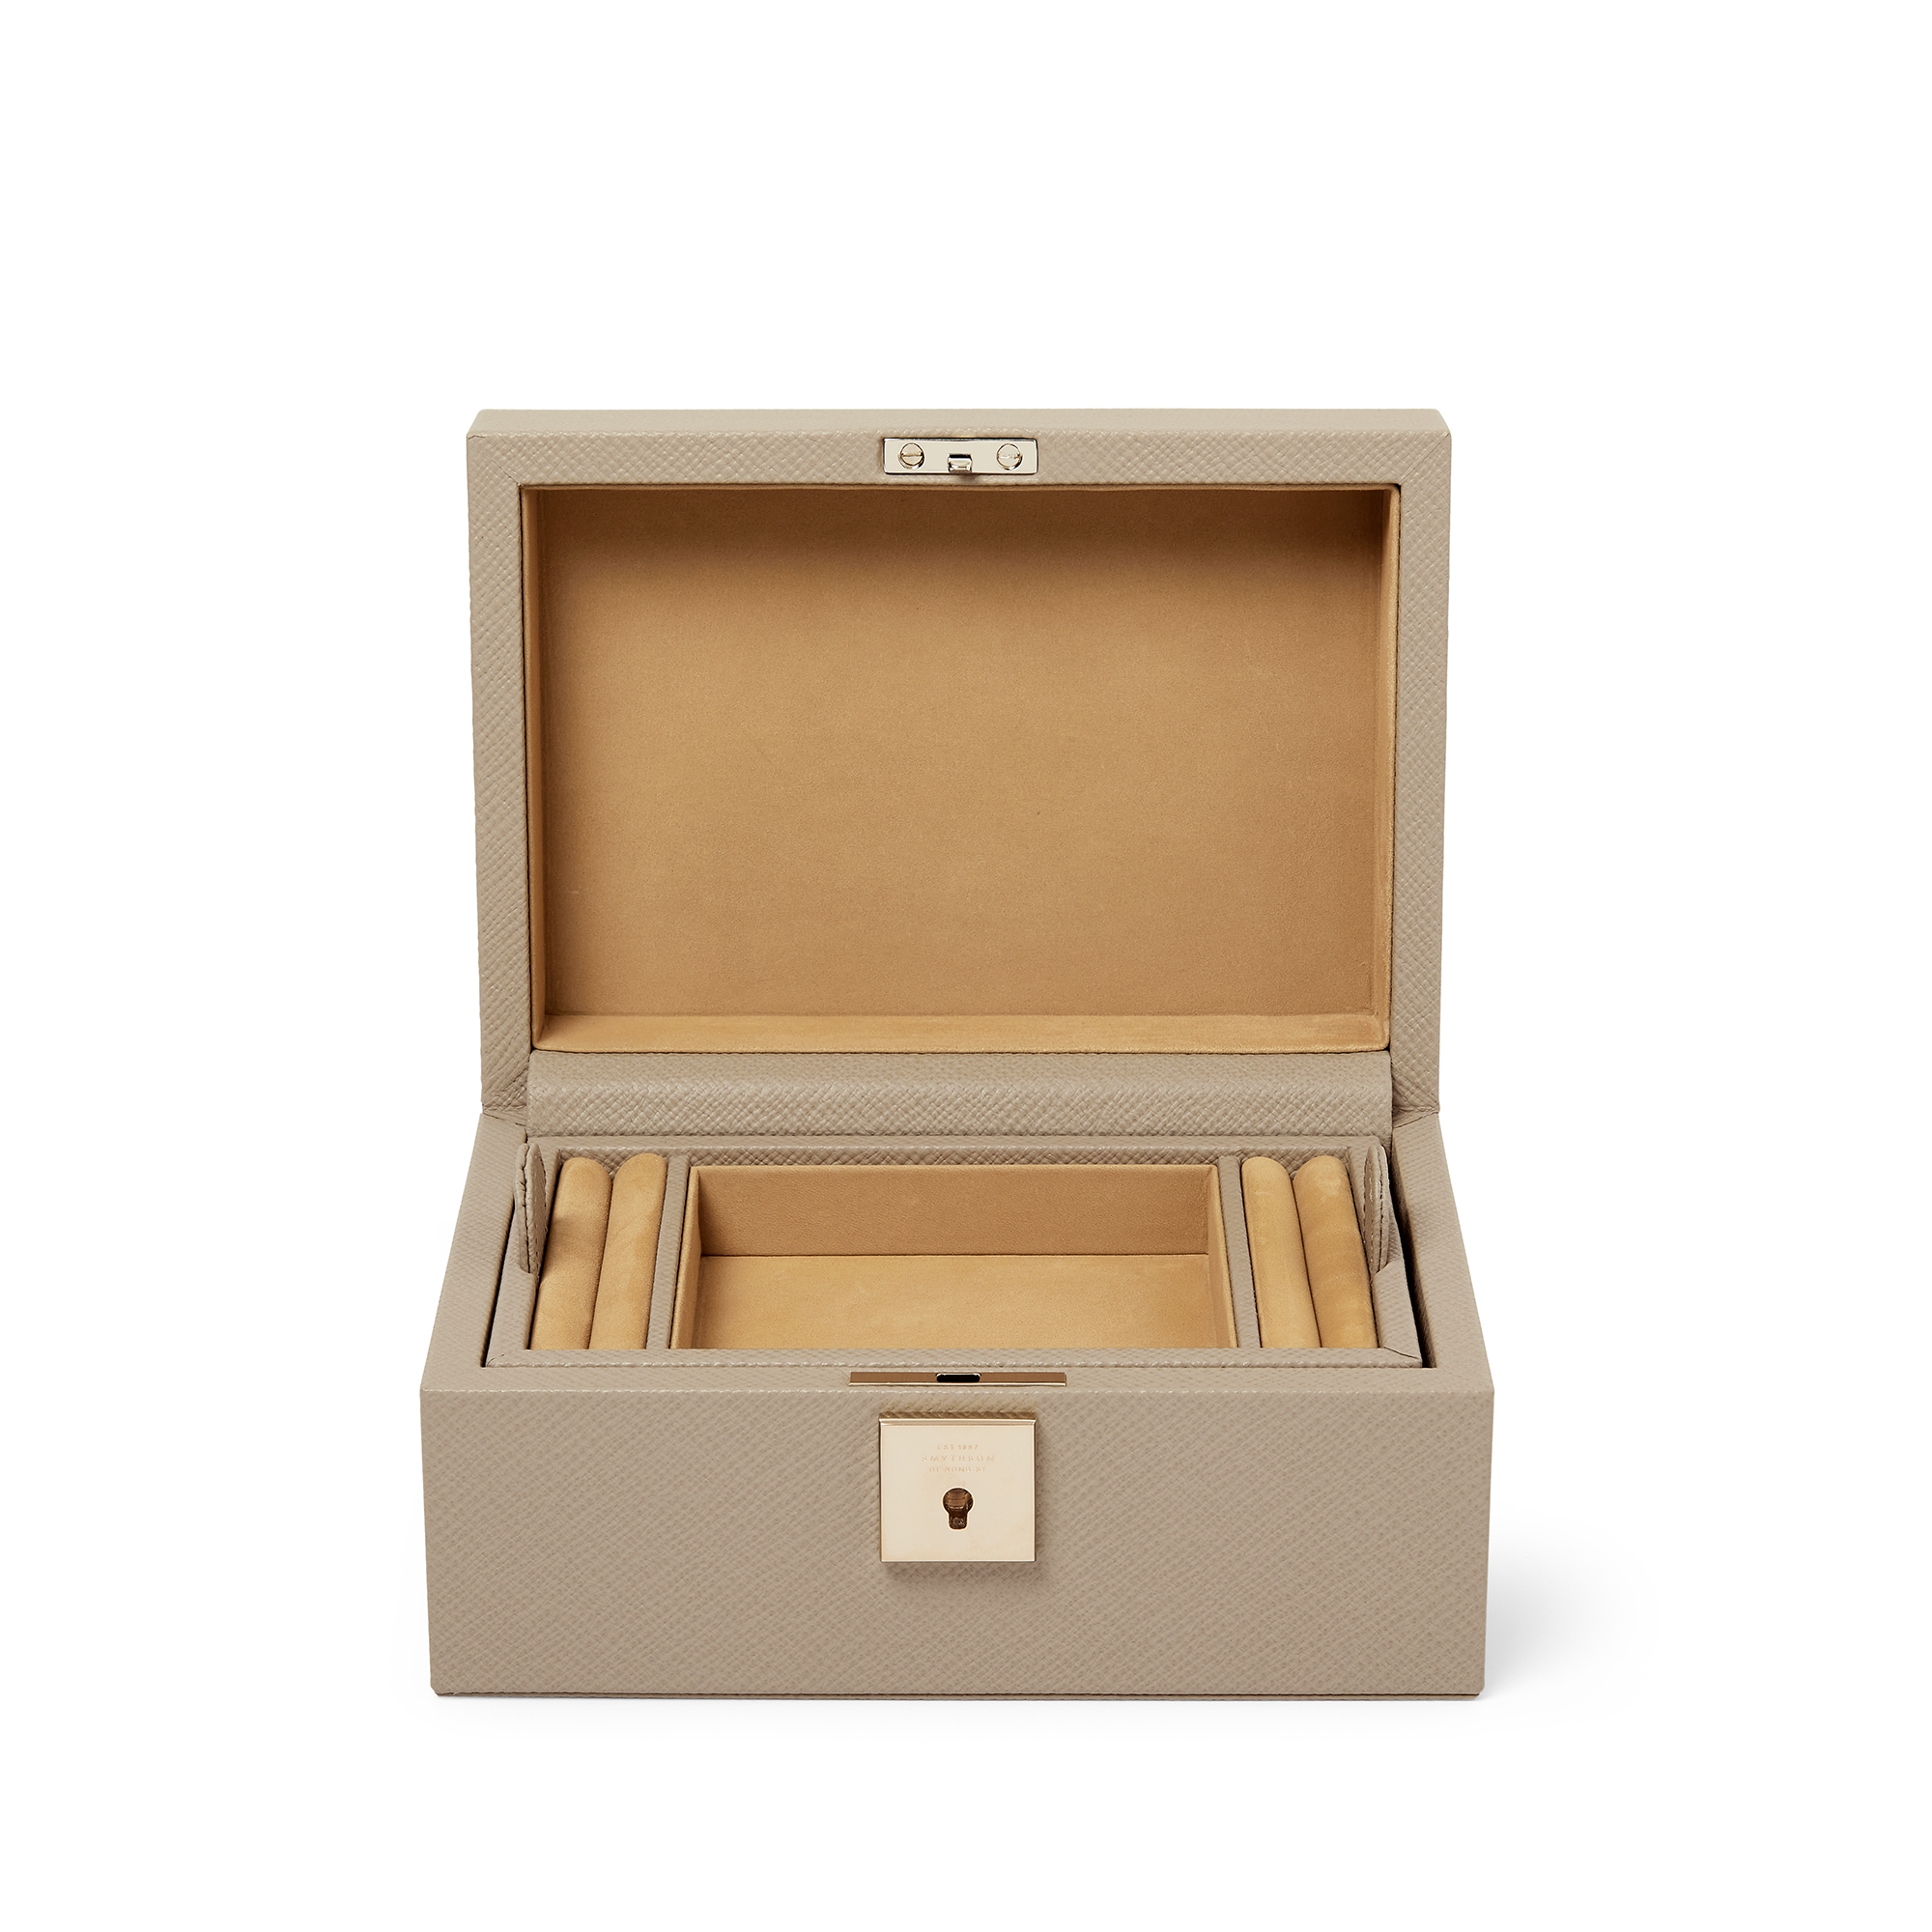 Smythson Small Jewelry Box With Tray In Panama In Sandstone